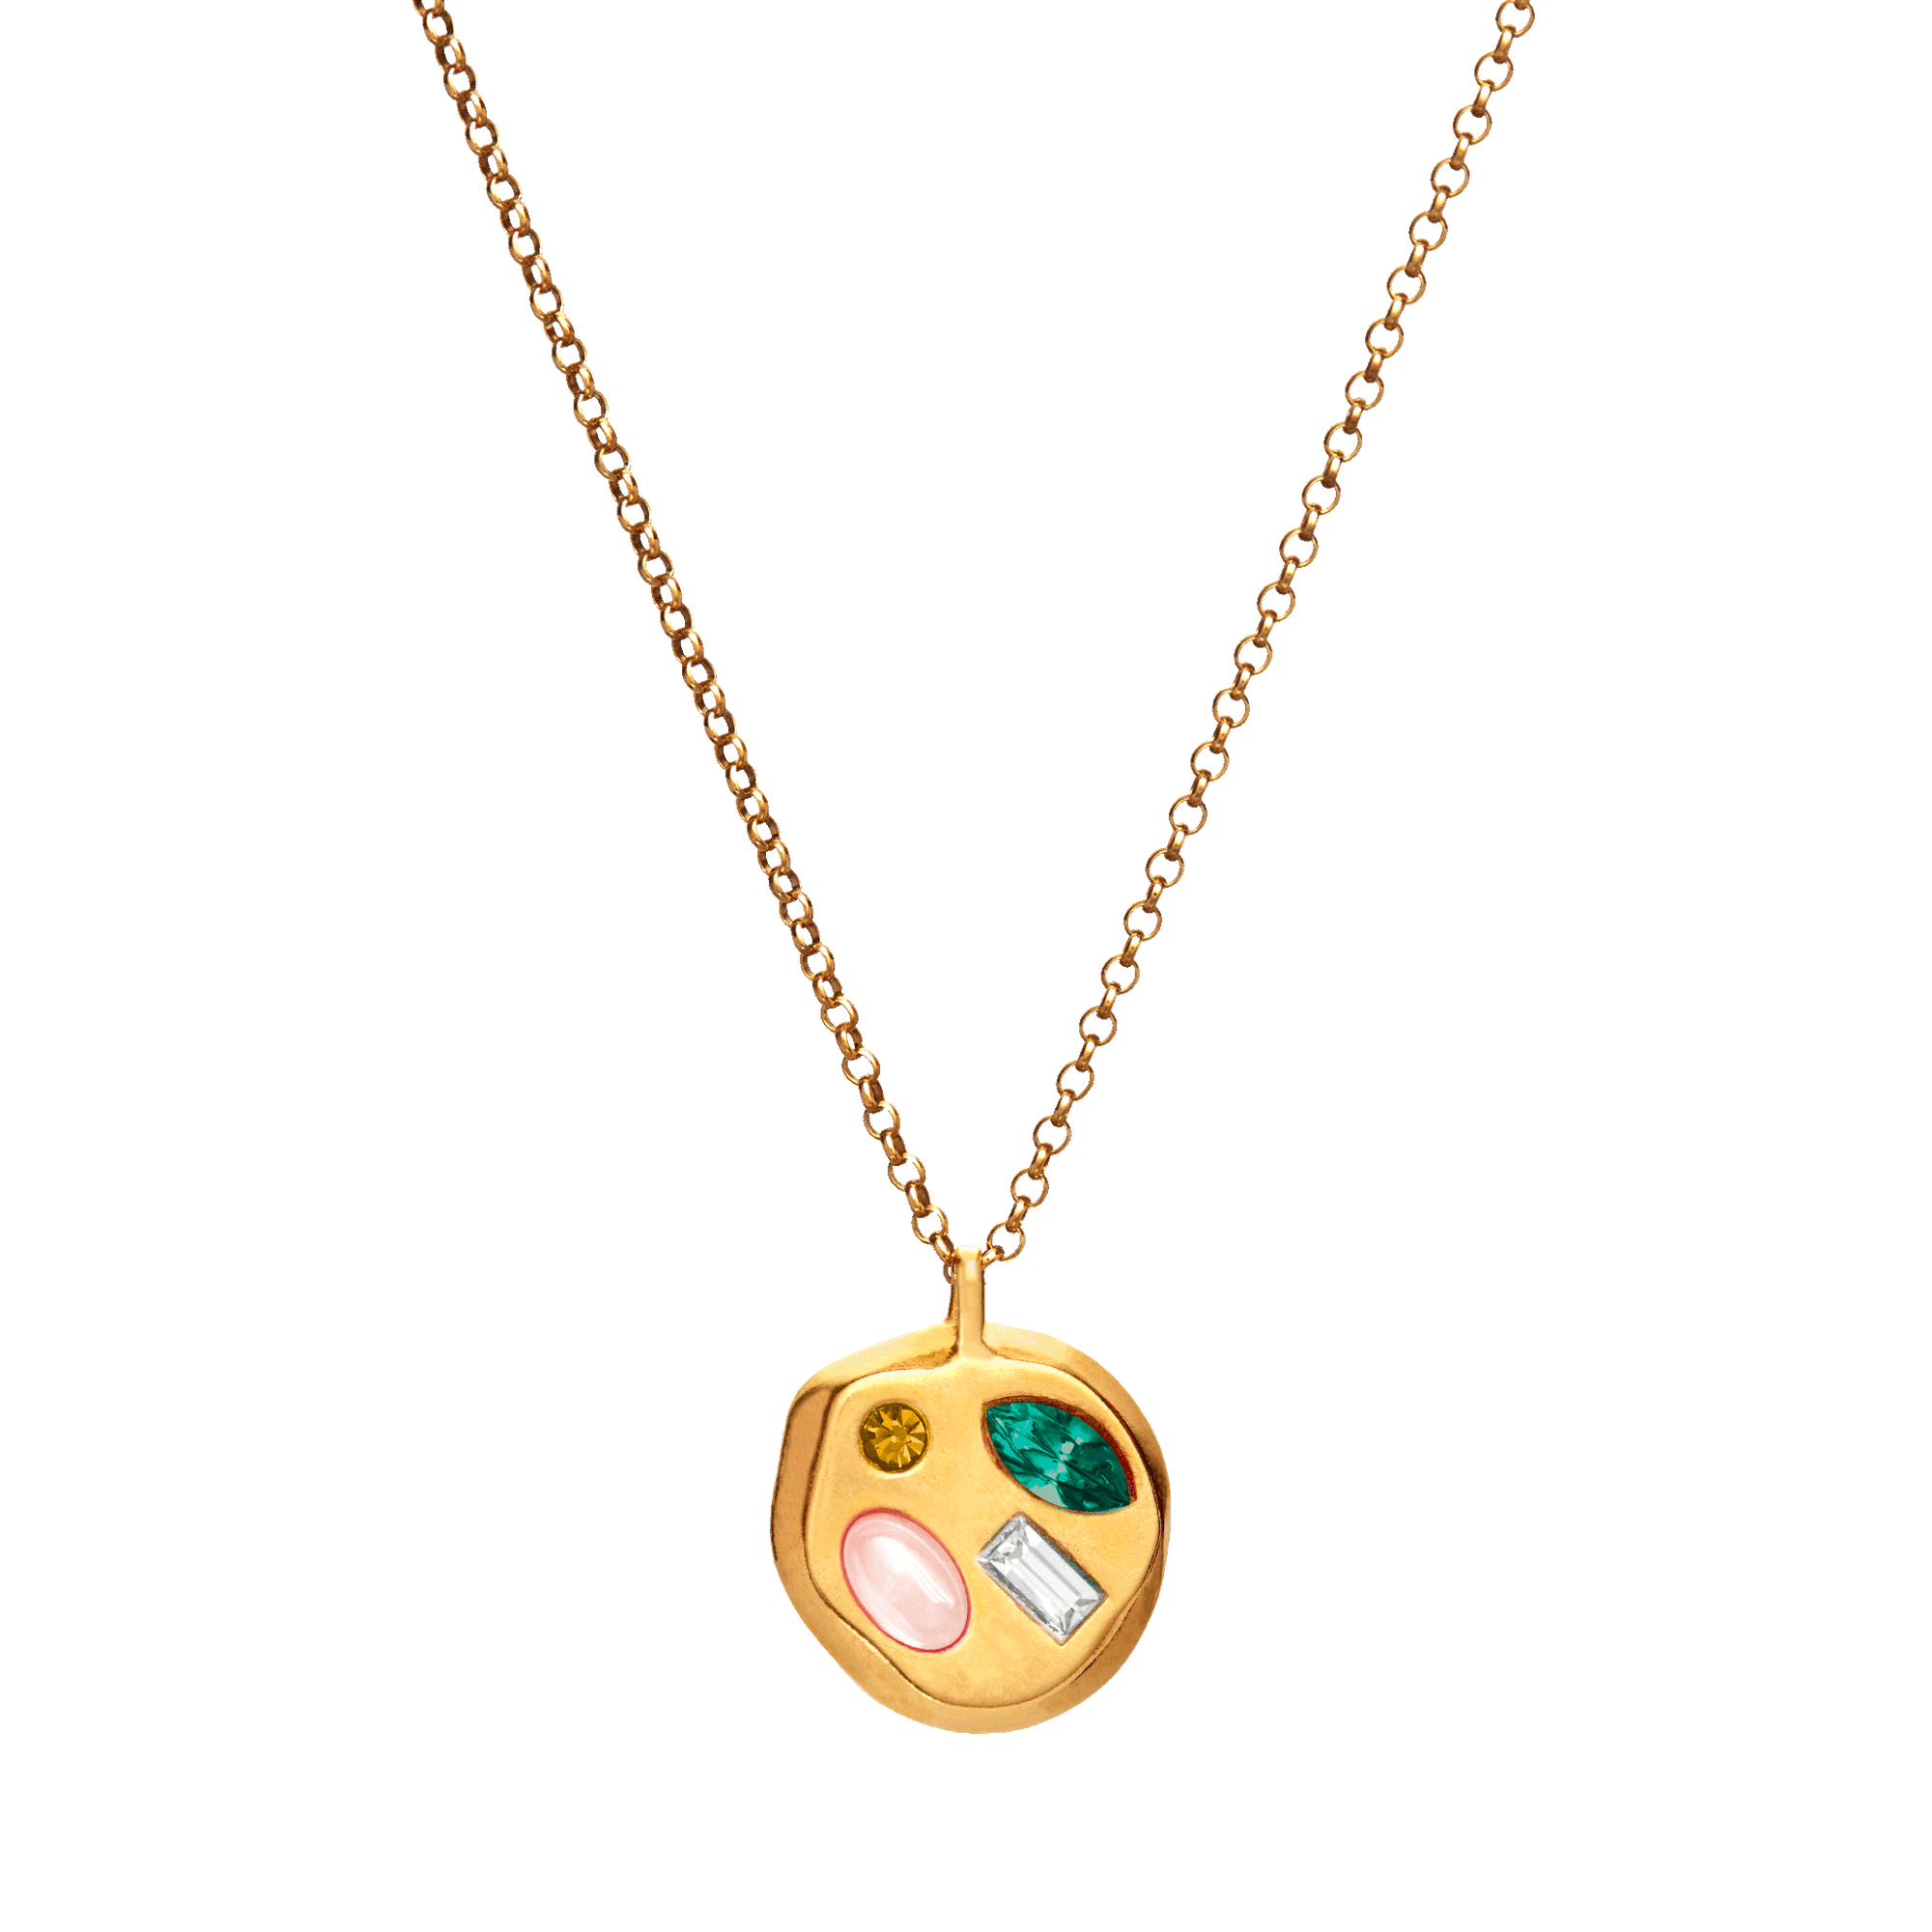 The May Eighth Pendant